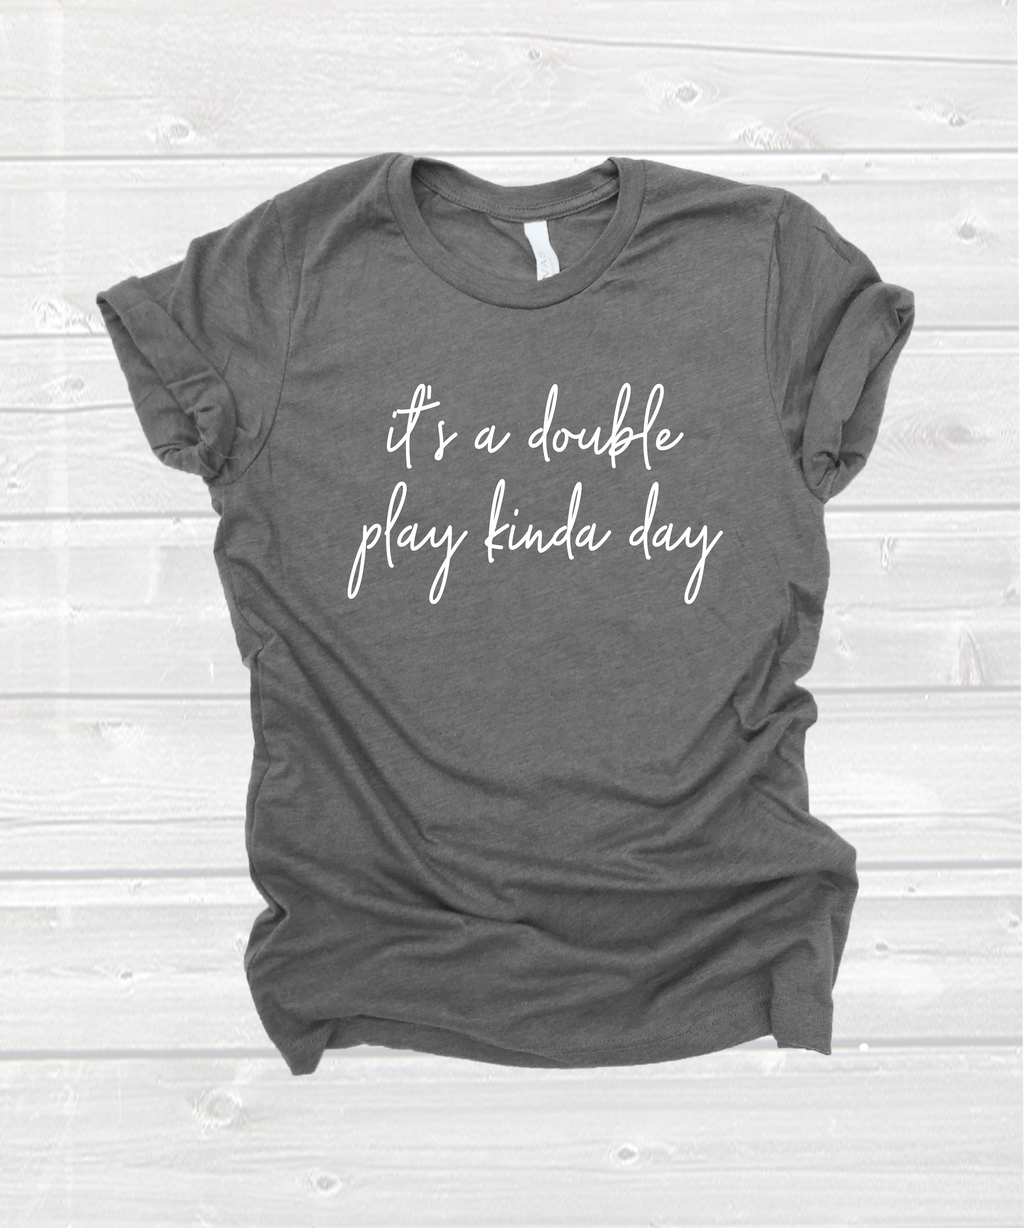 "it's a double play kinda day" tee in heather grey